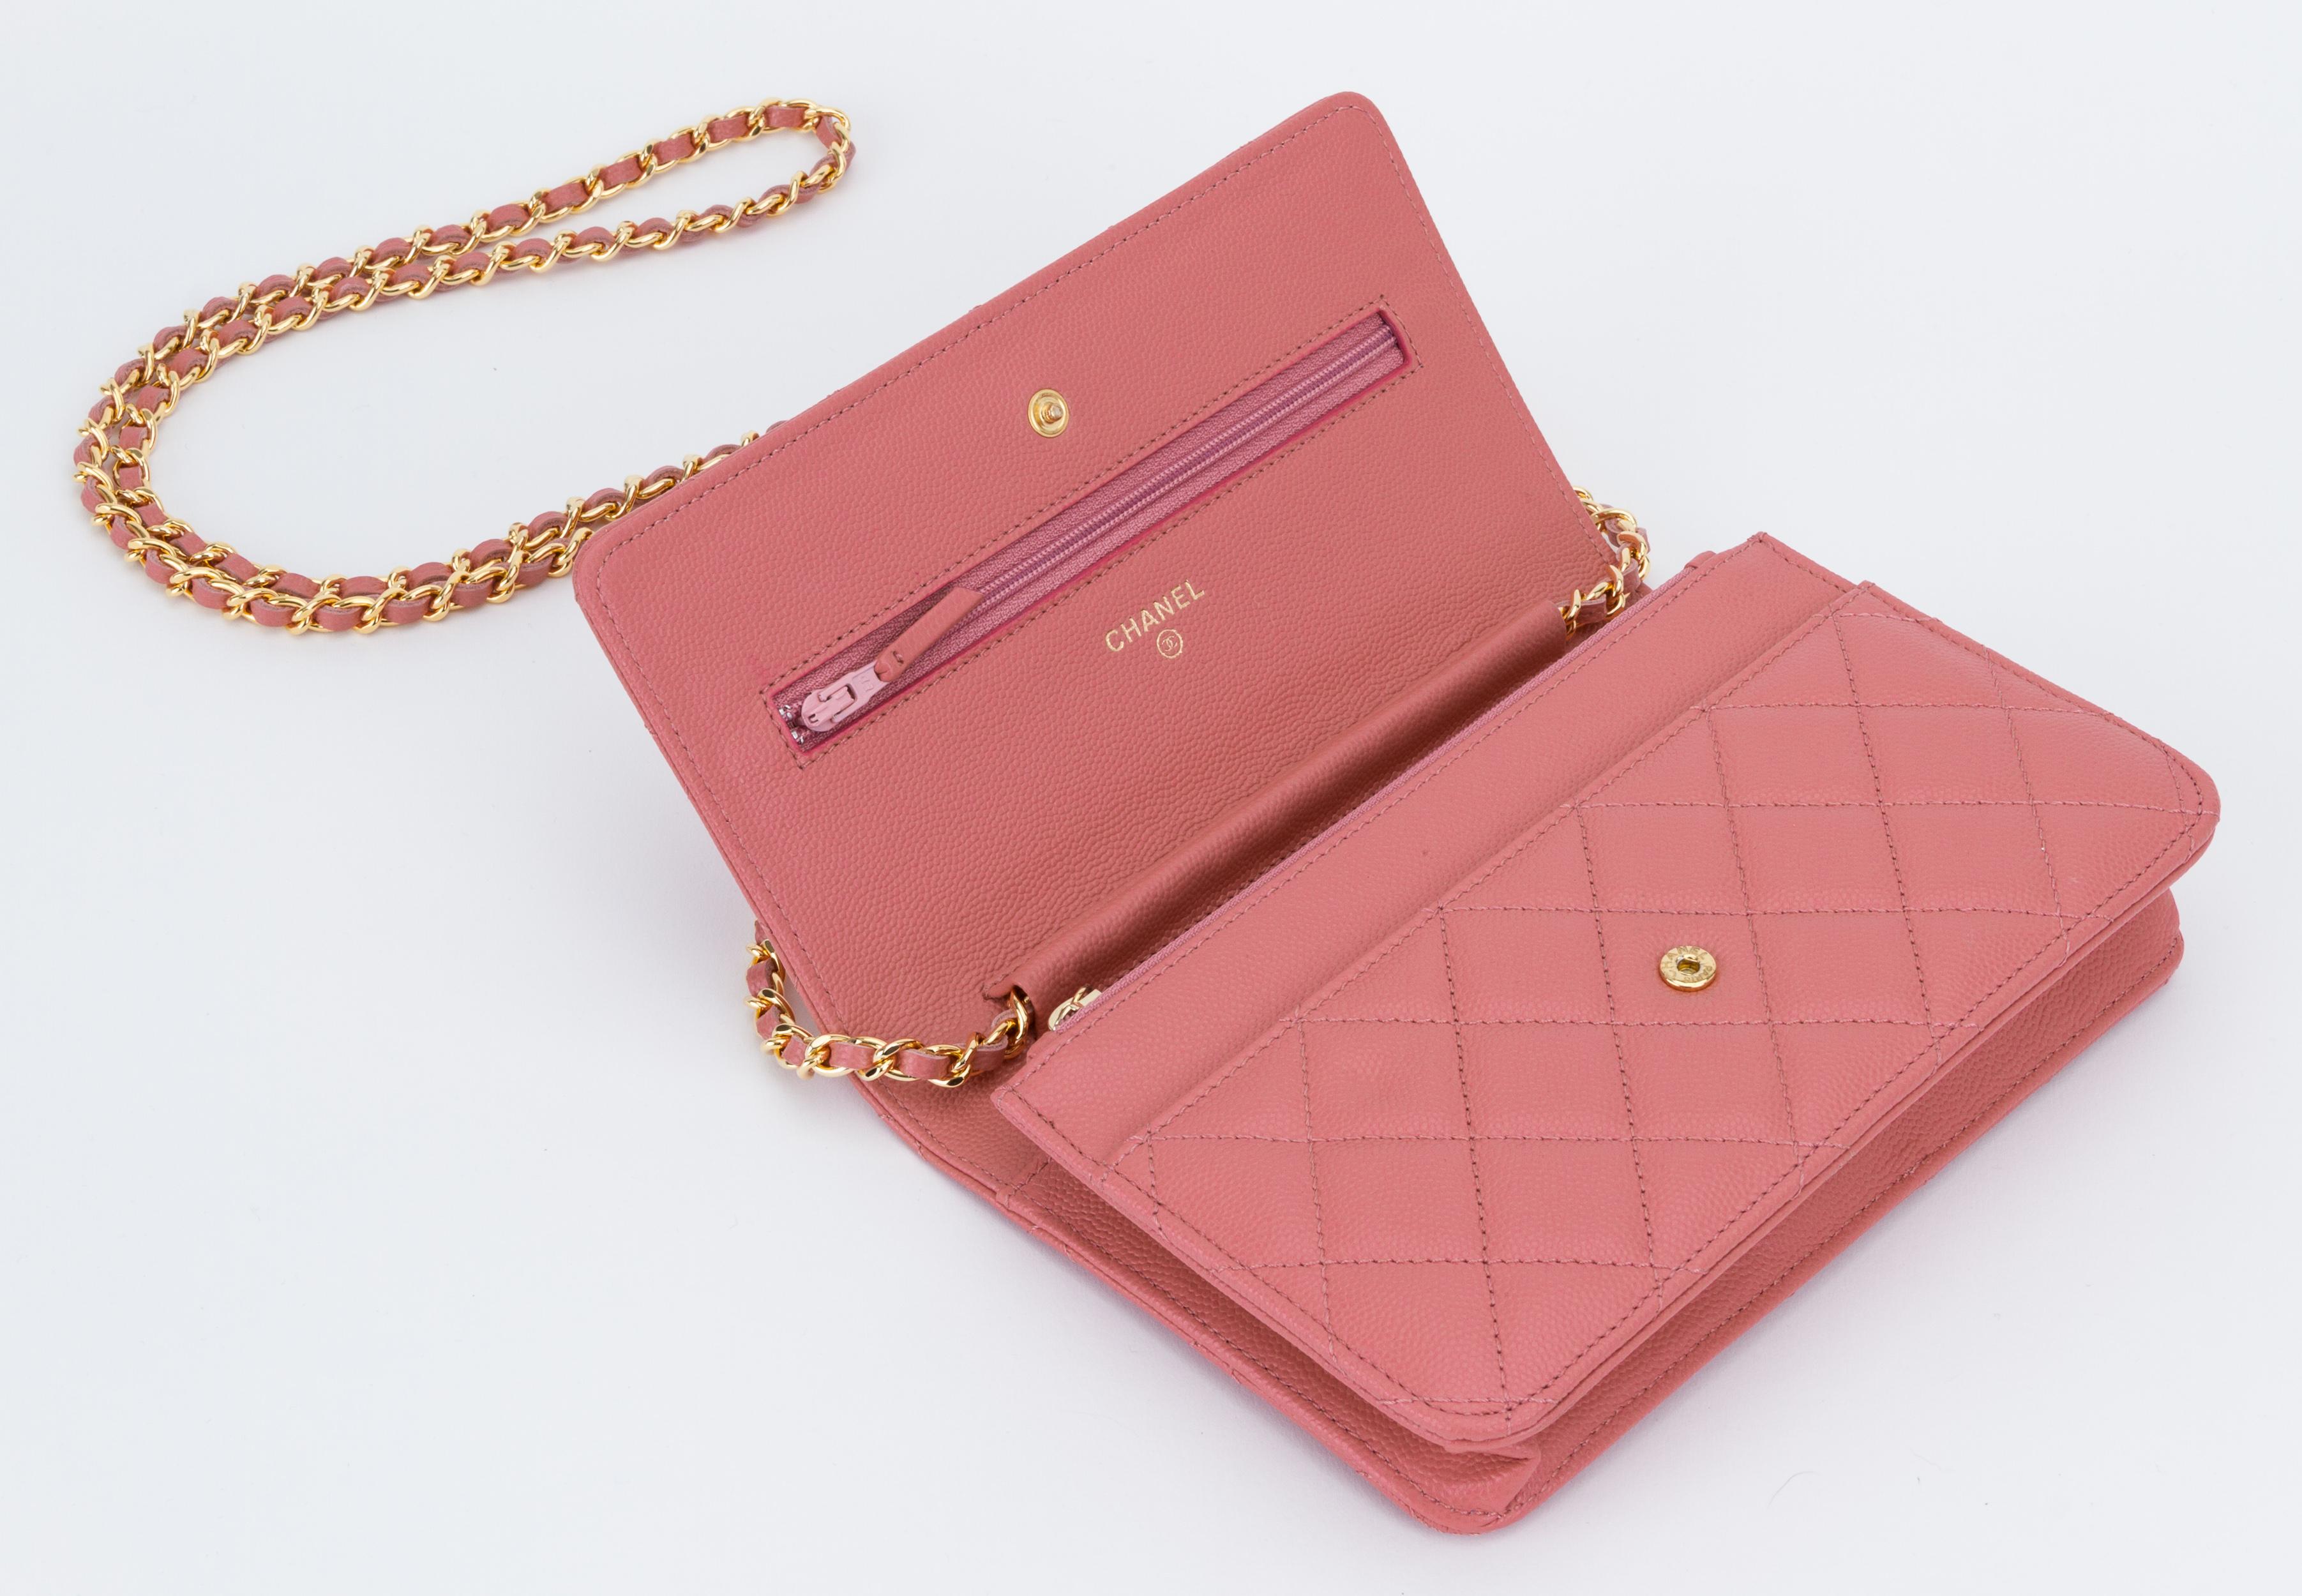 New Chanel PInk Caviar Wallet On A Chain Bag 1